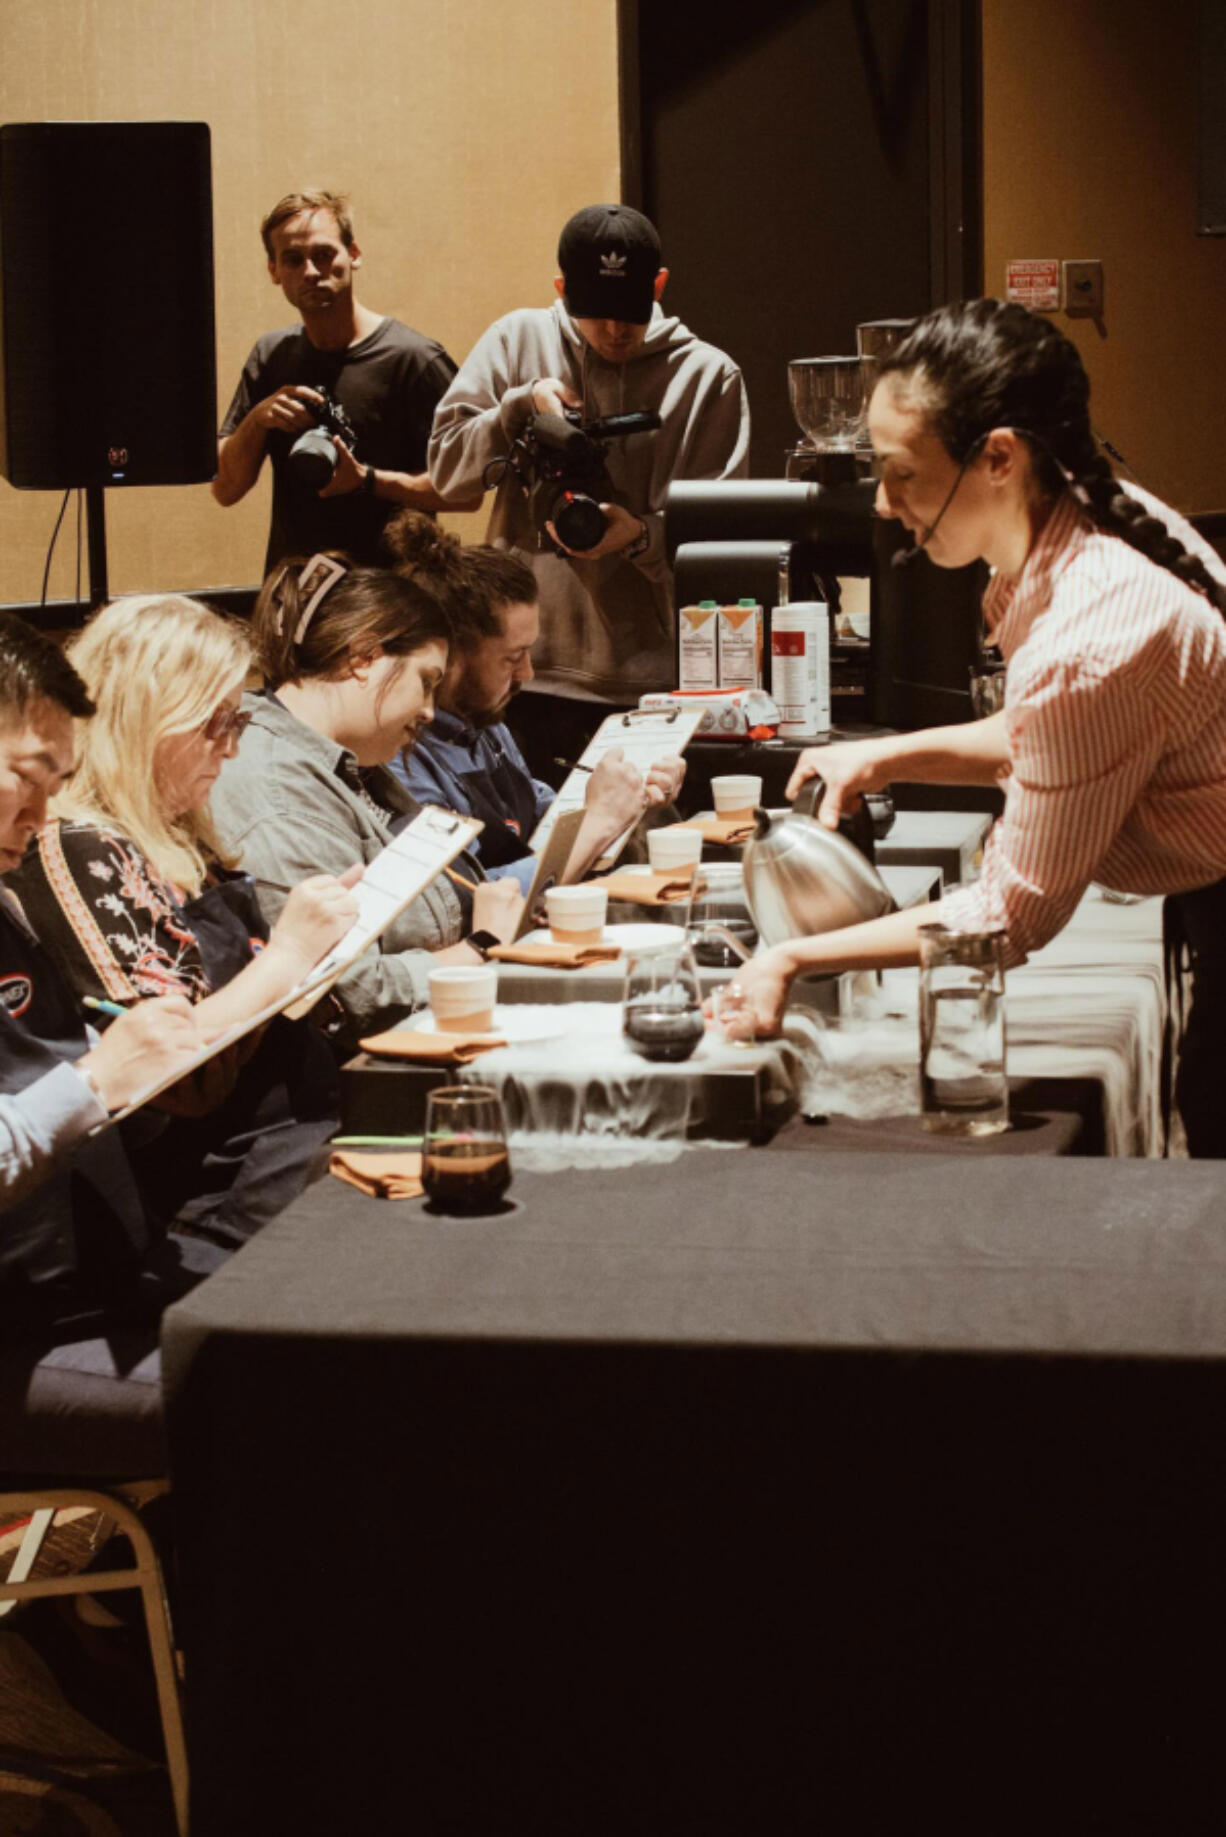 Seidy Selivanow of Kafiex Roasters placed eighth in the nation at the U.S. Barista Championship at Klatch Coffee in Rancho Cucamonga, Calif., in March.